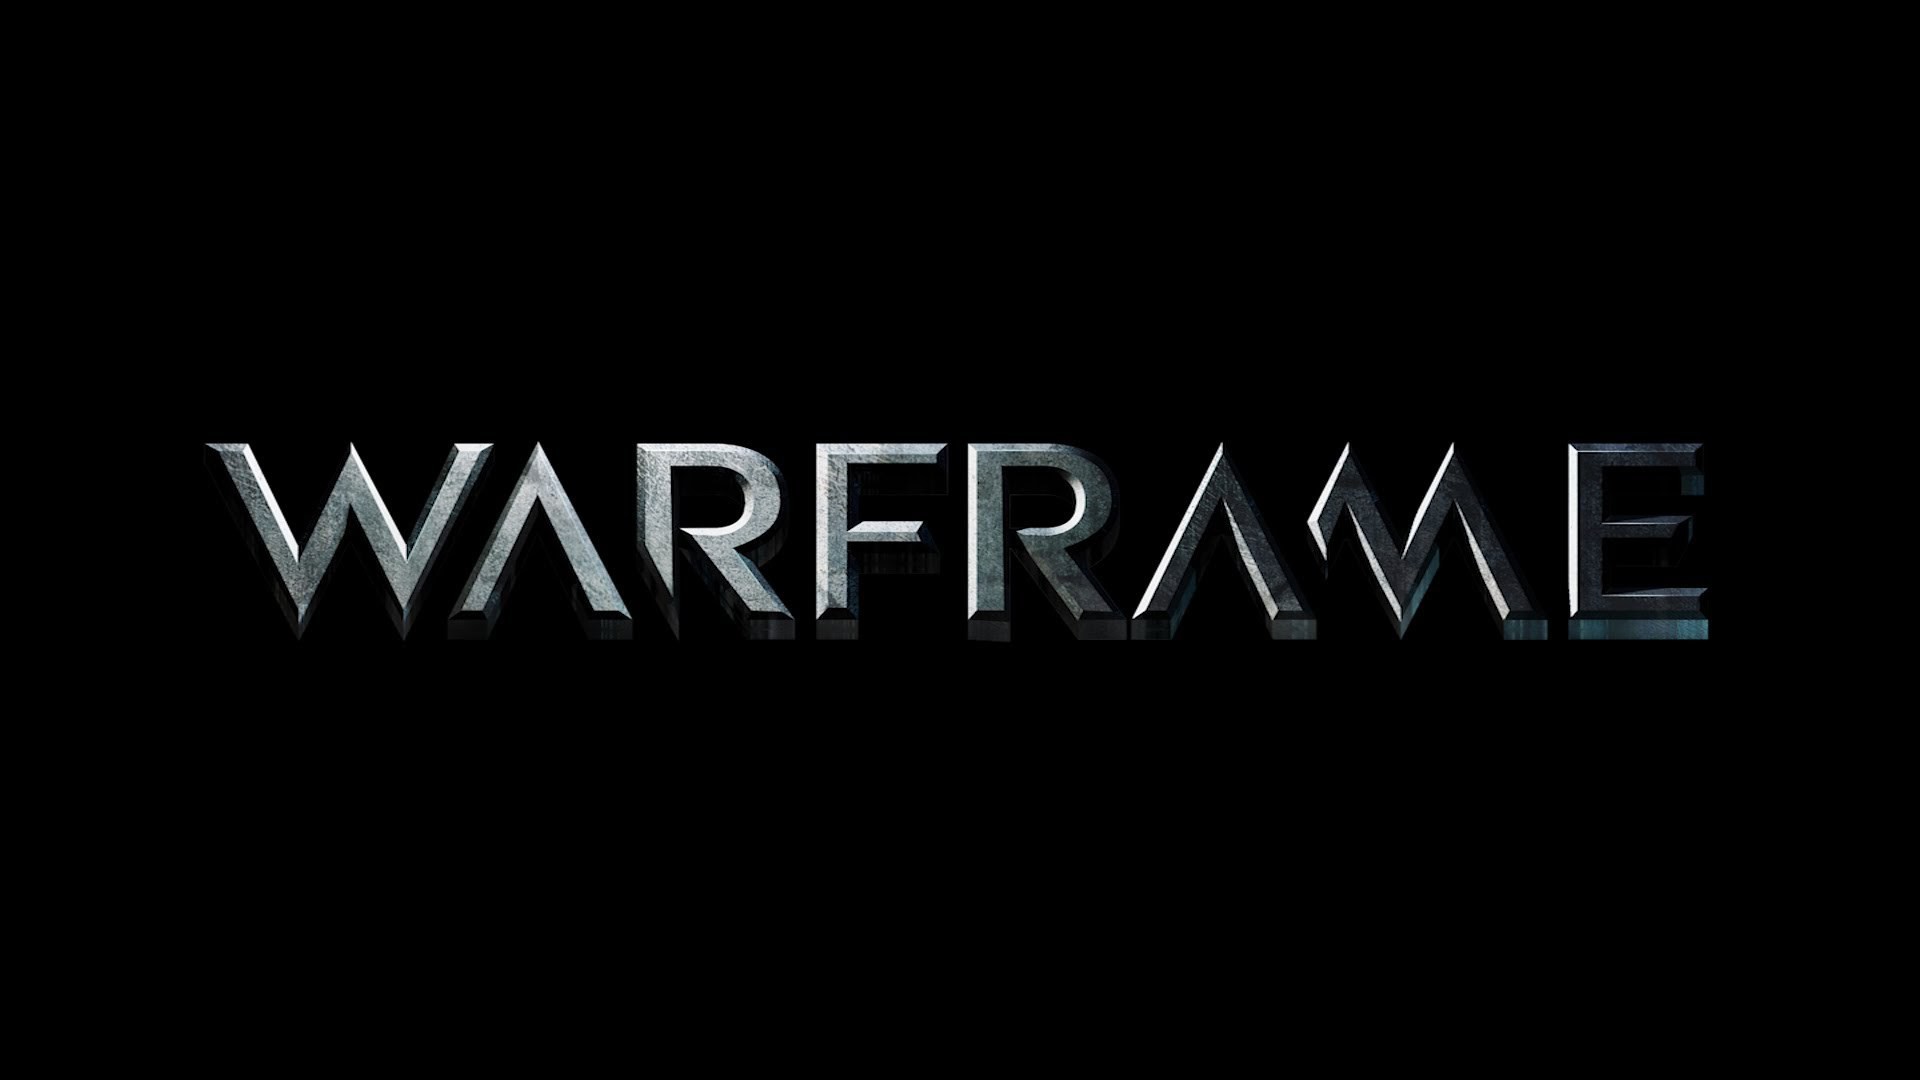 1920x1080 Warframe: black background HD wallpapers and images - wallpapers .